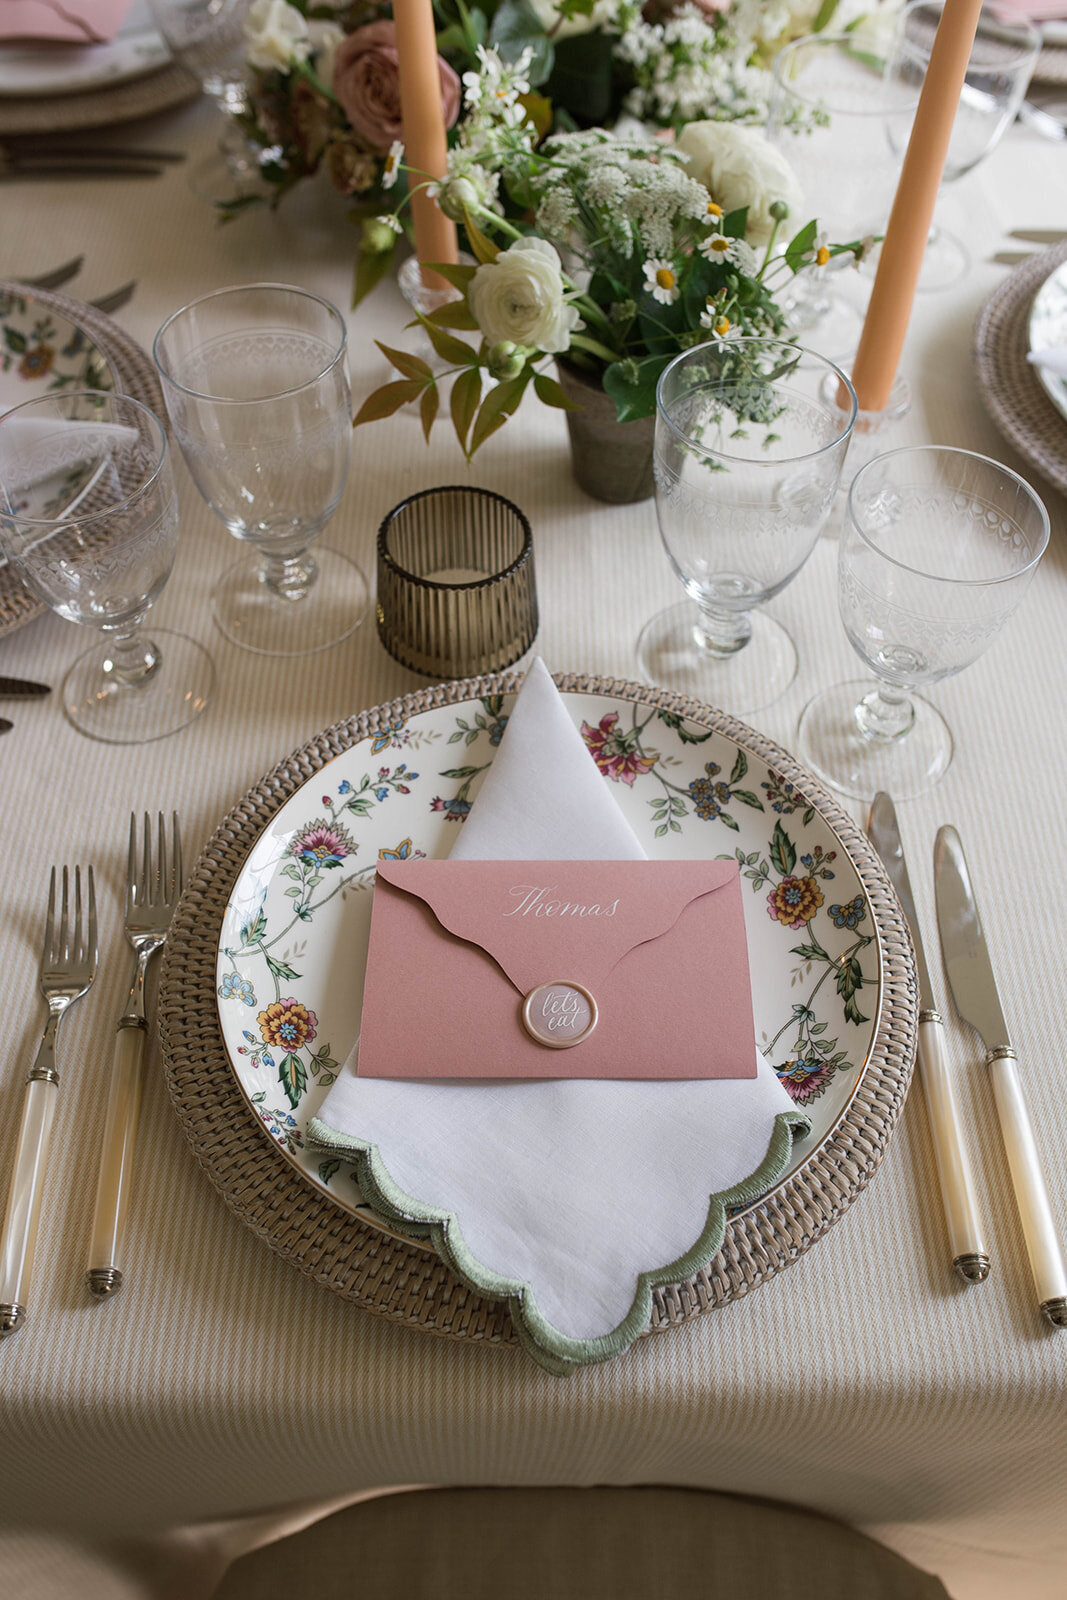 The reception table setting with neutral cream linen, a wicker charger, and floral china plate embellished with a napkin and custom pink place card.